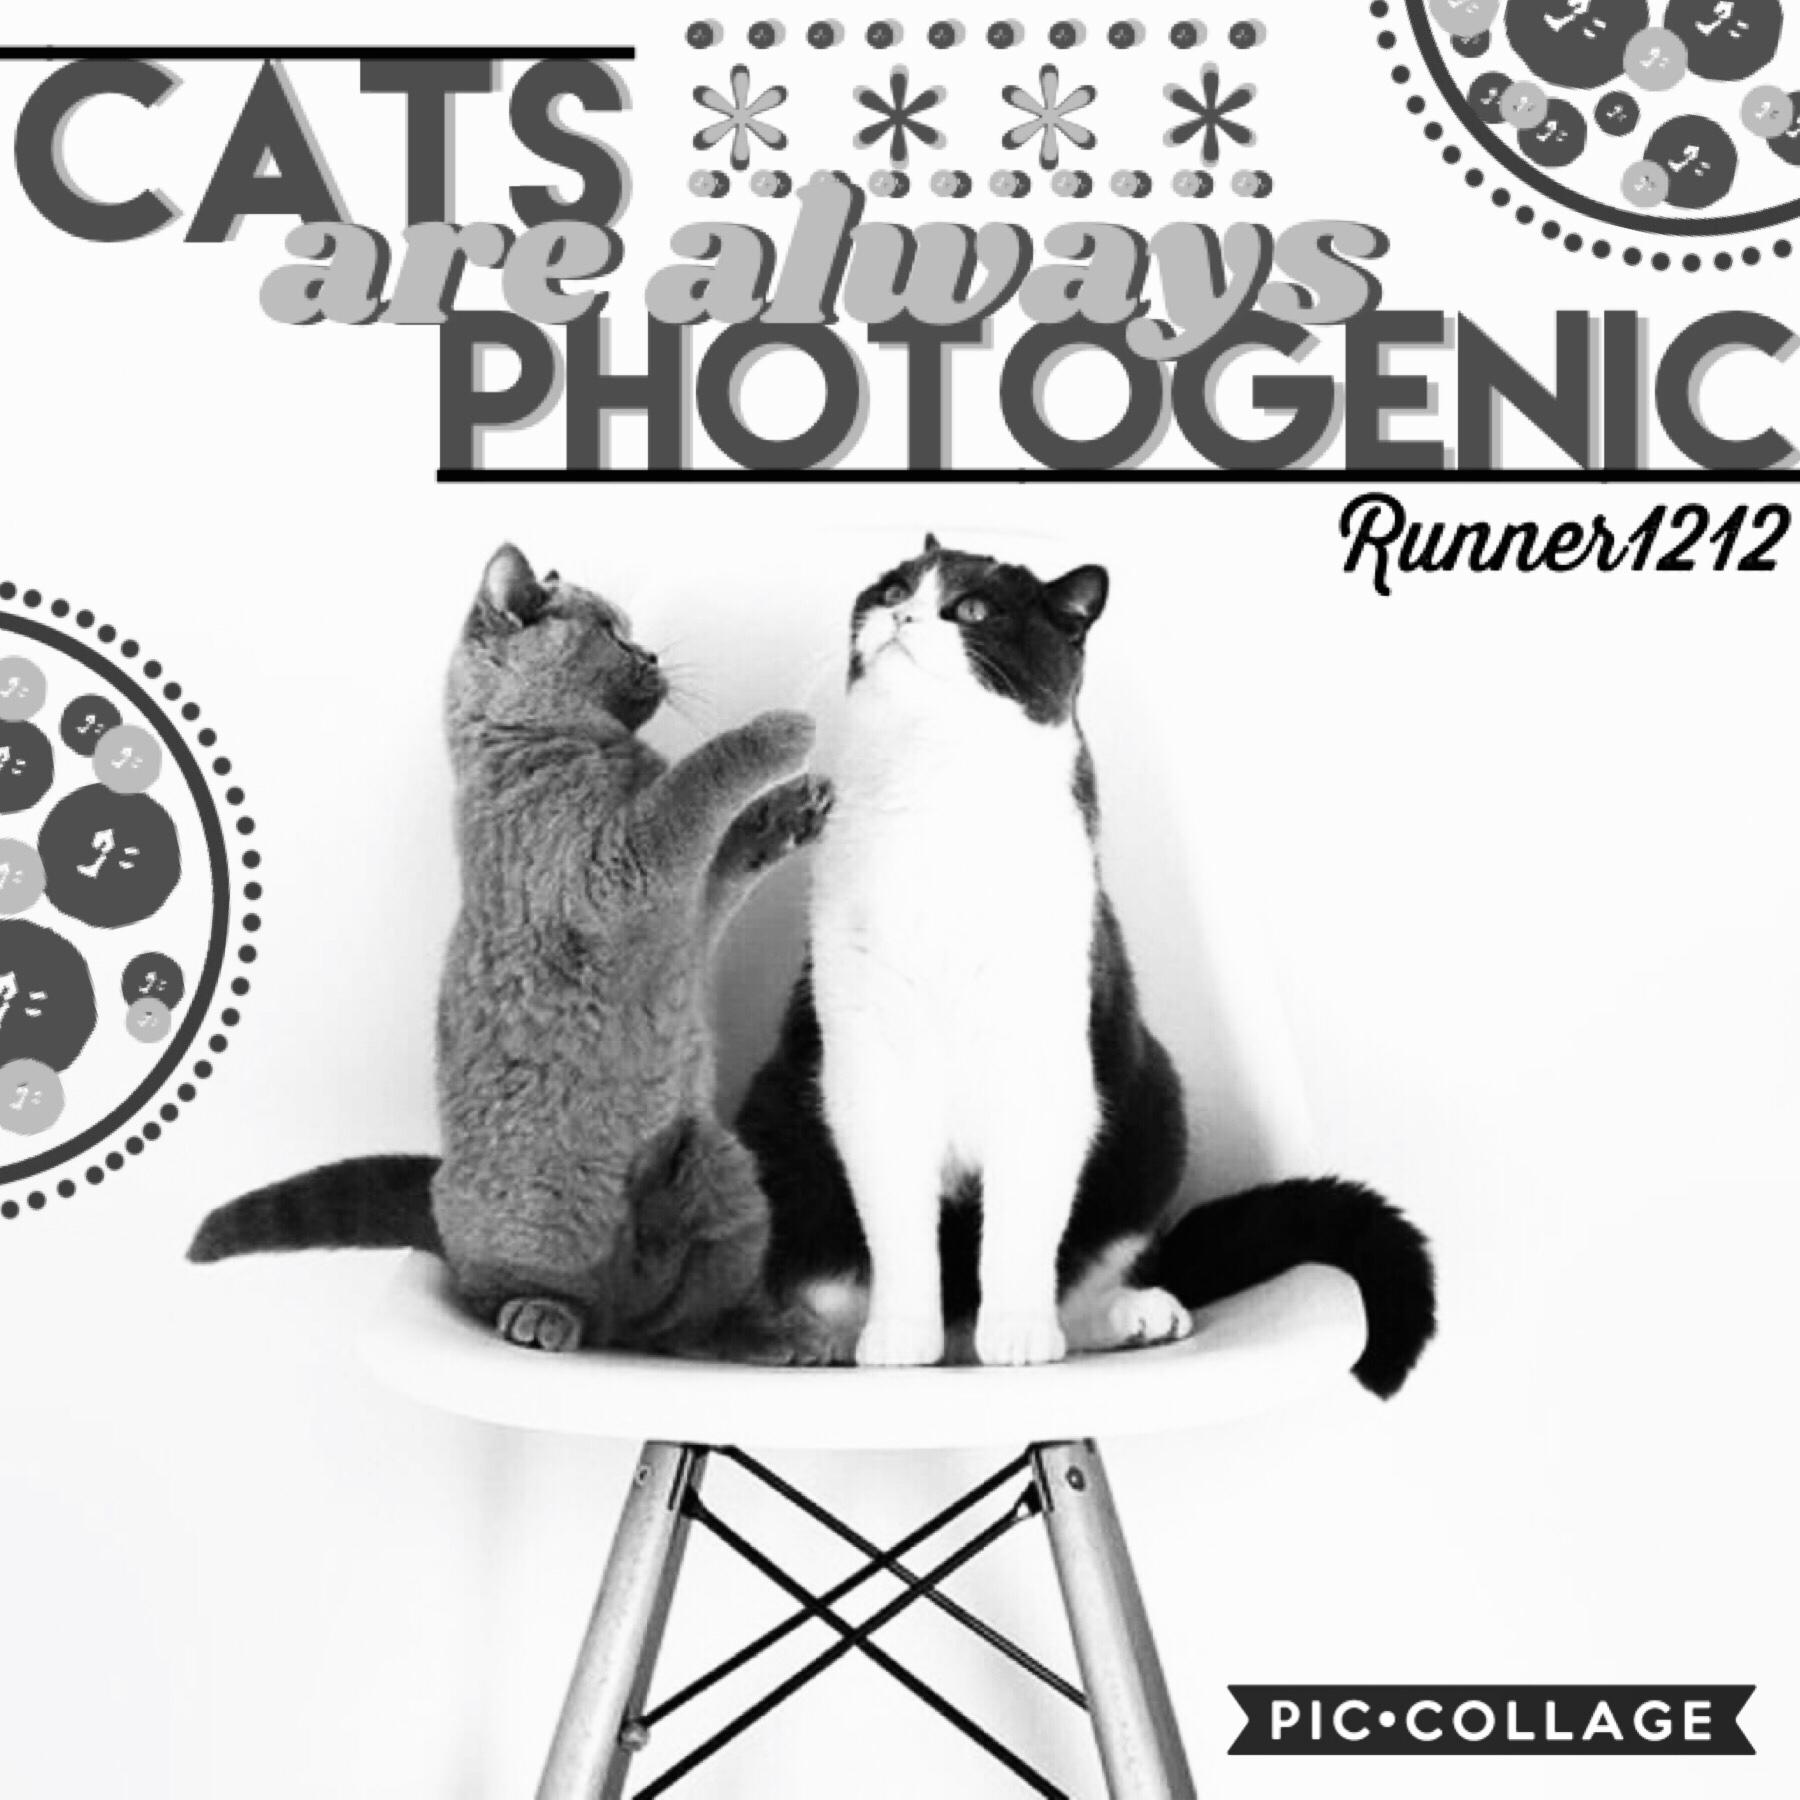 Tap!
This was entered a battle of collagers for Golden-vibe’s account! The task was to make a black and white collage! It was actually really fun and I’m glad to see it turned out okay!
Have a nice day!
7/20/20
😁